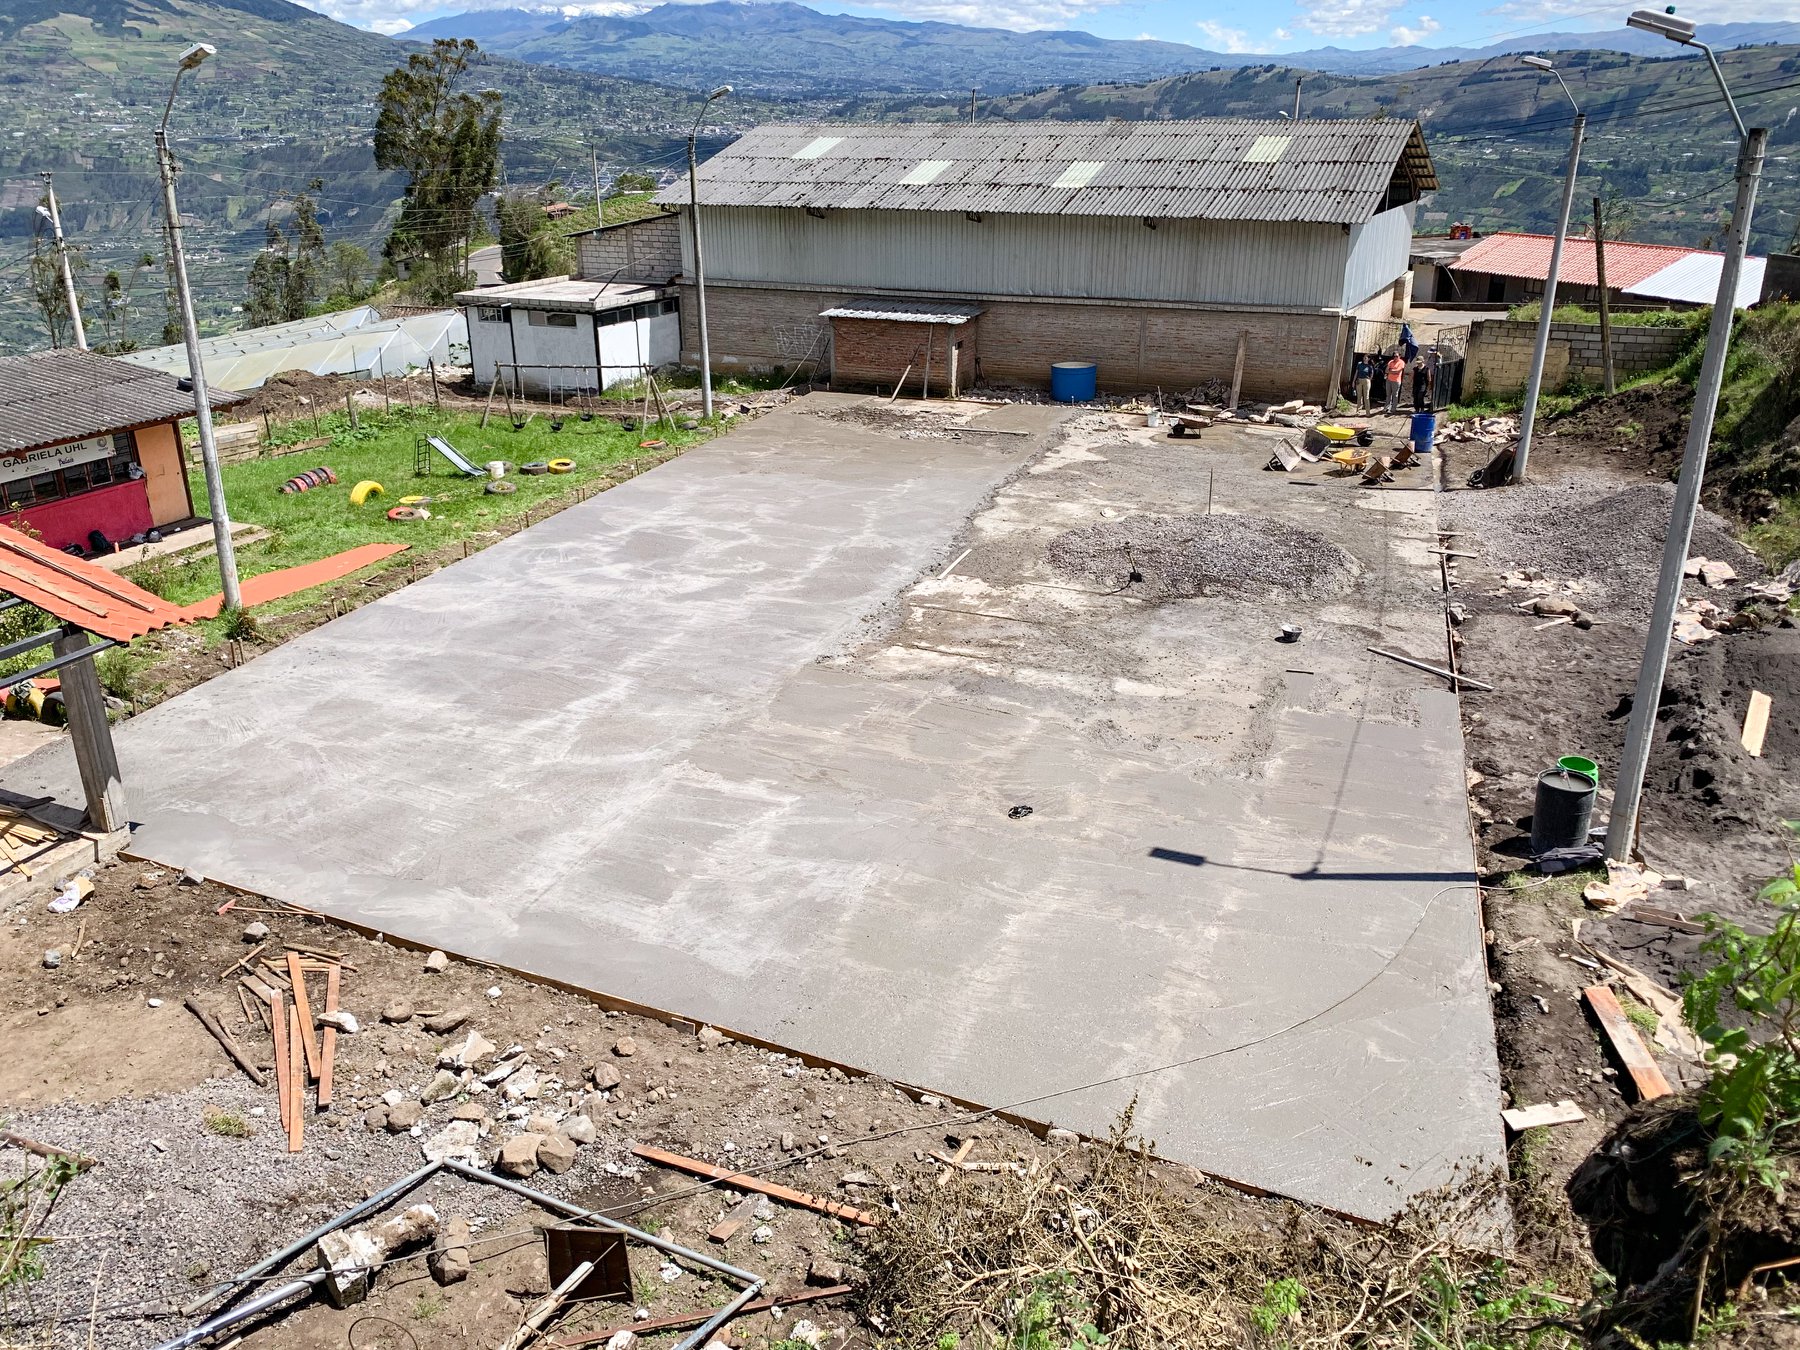 Vantage point view of finished restoration soccer pitch for community service in Ecuador